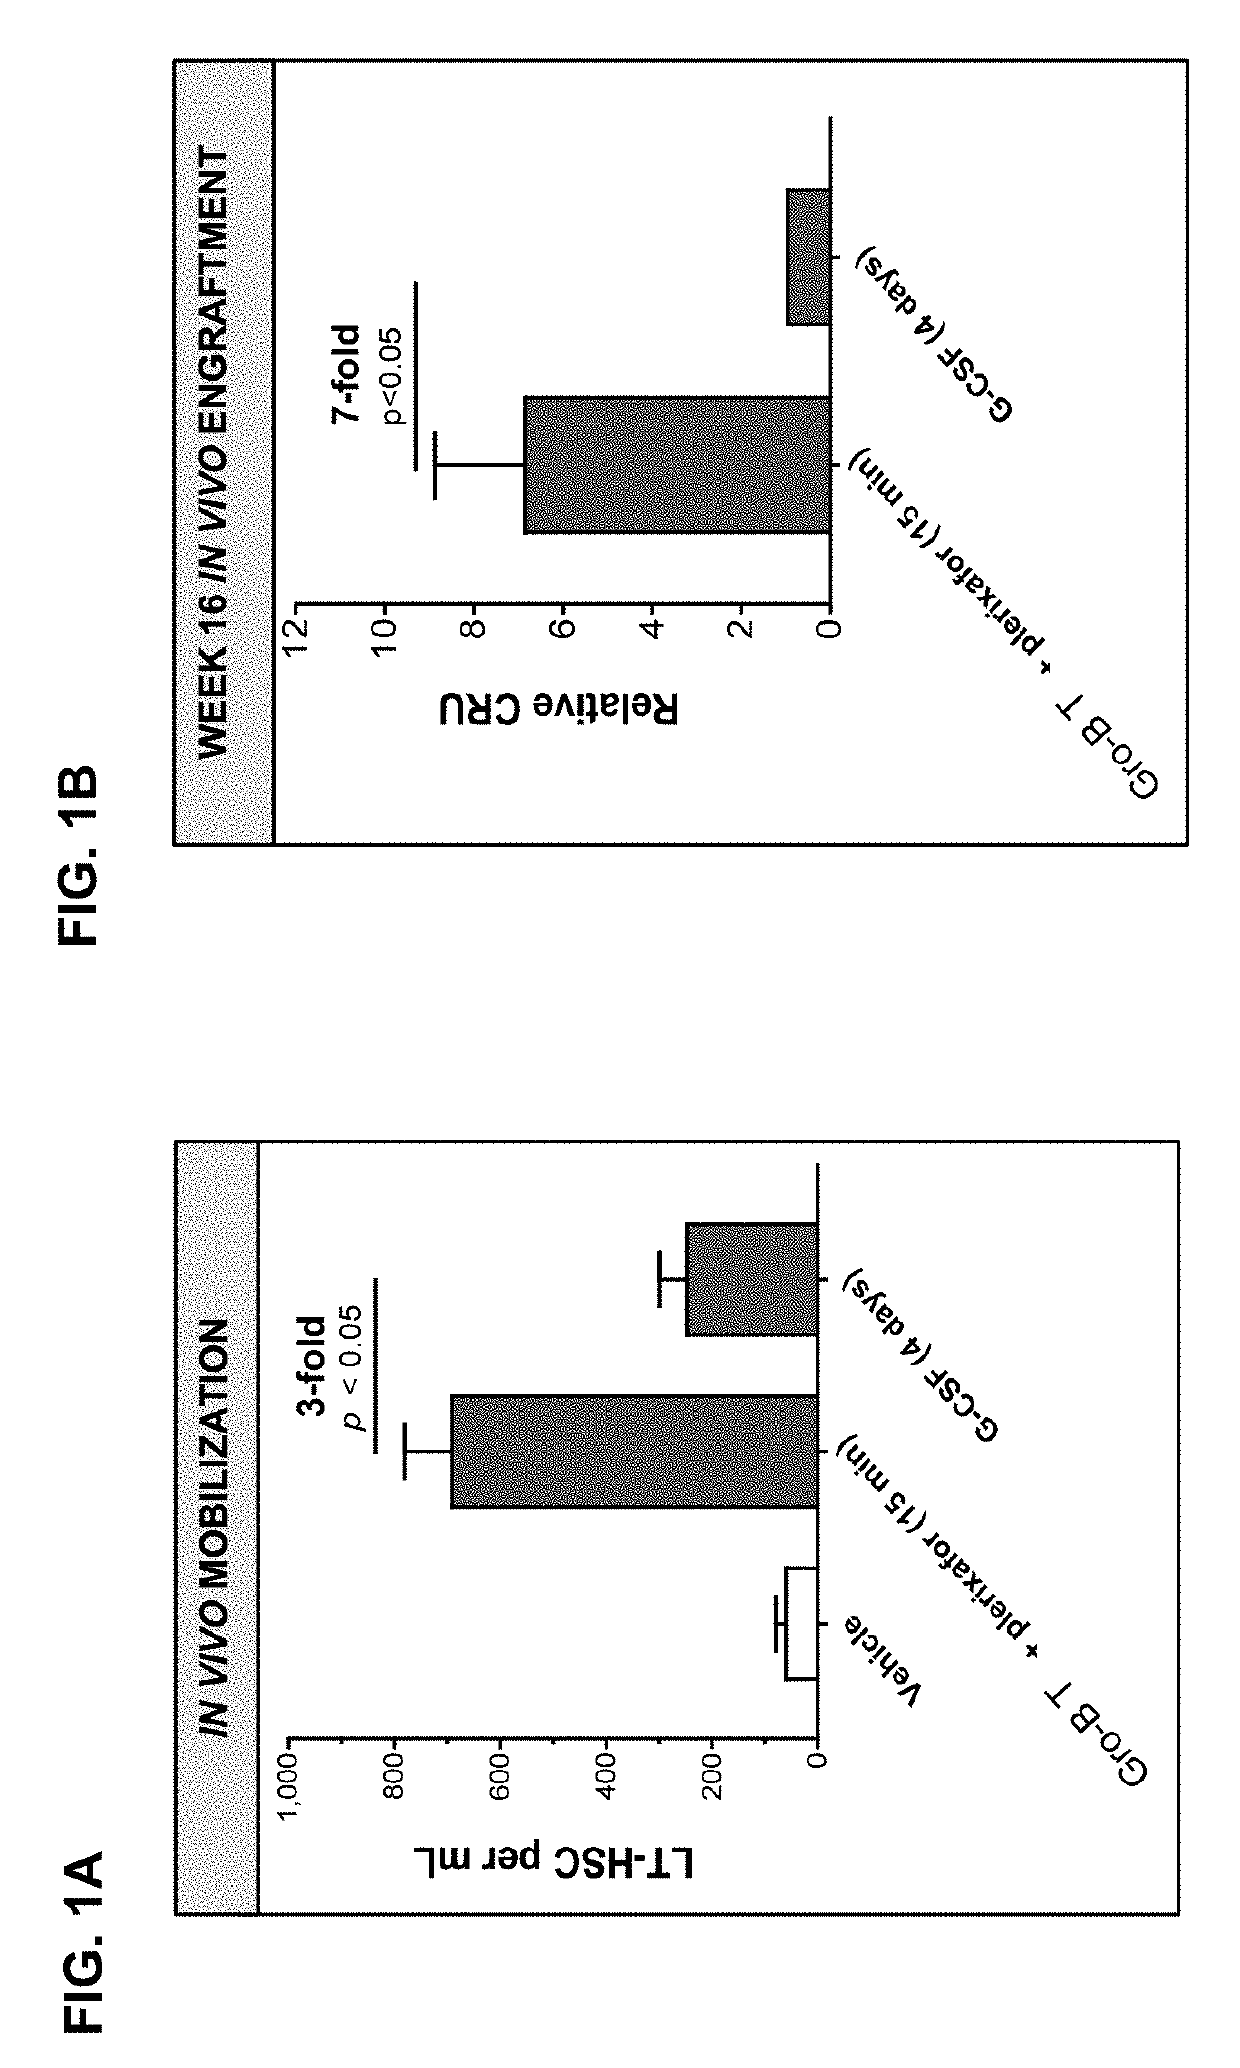 Dosing regimens for the mobilization of hematopoietic stem and progenitor cells